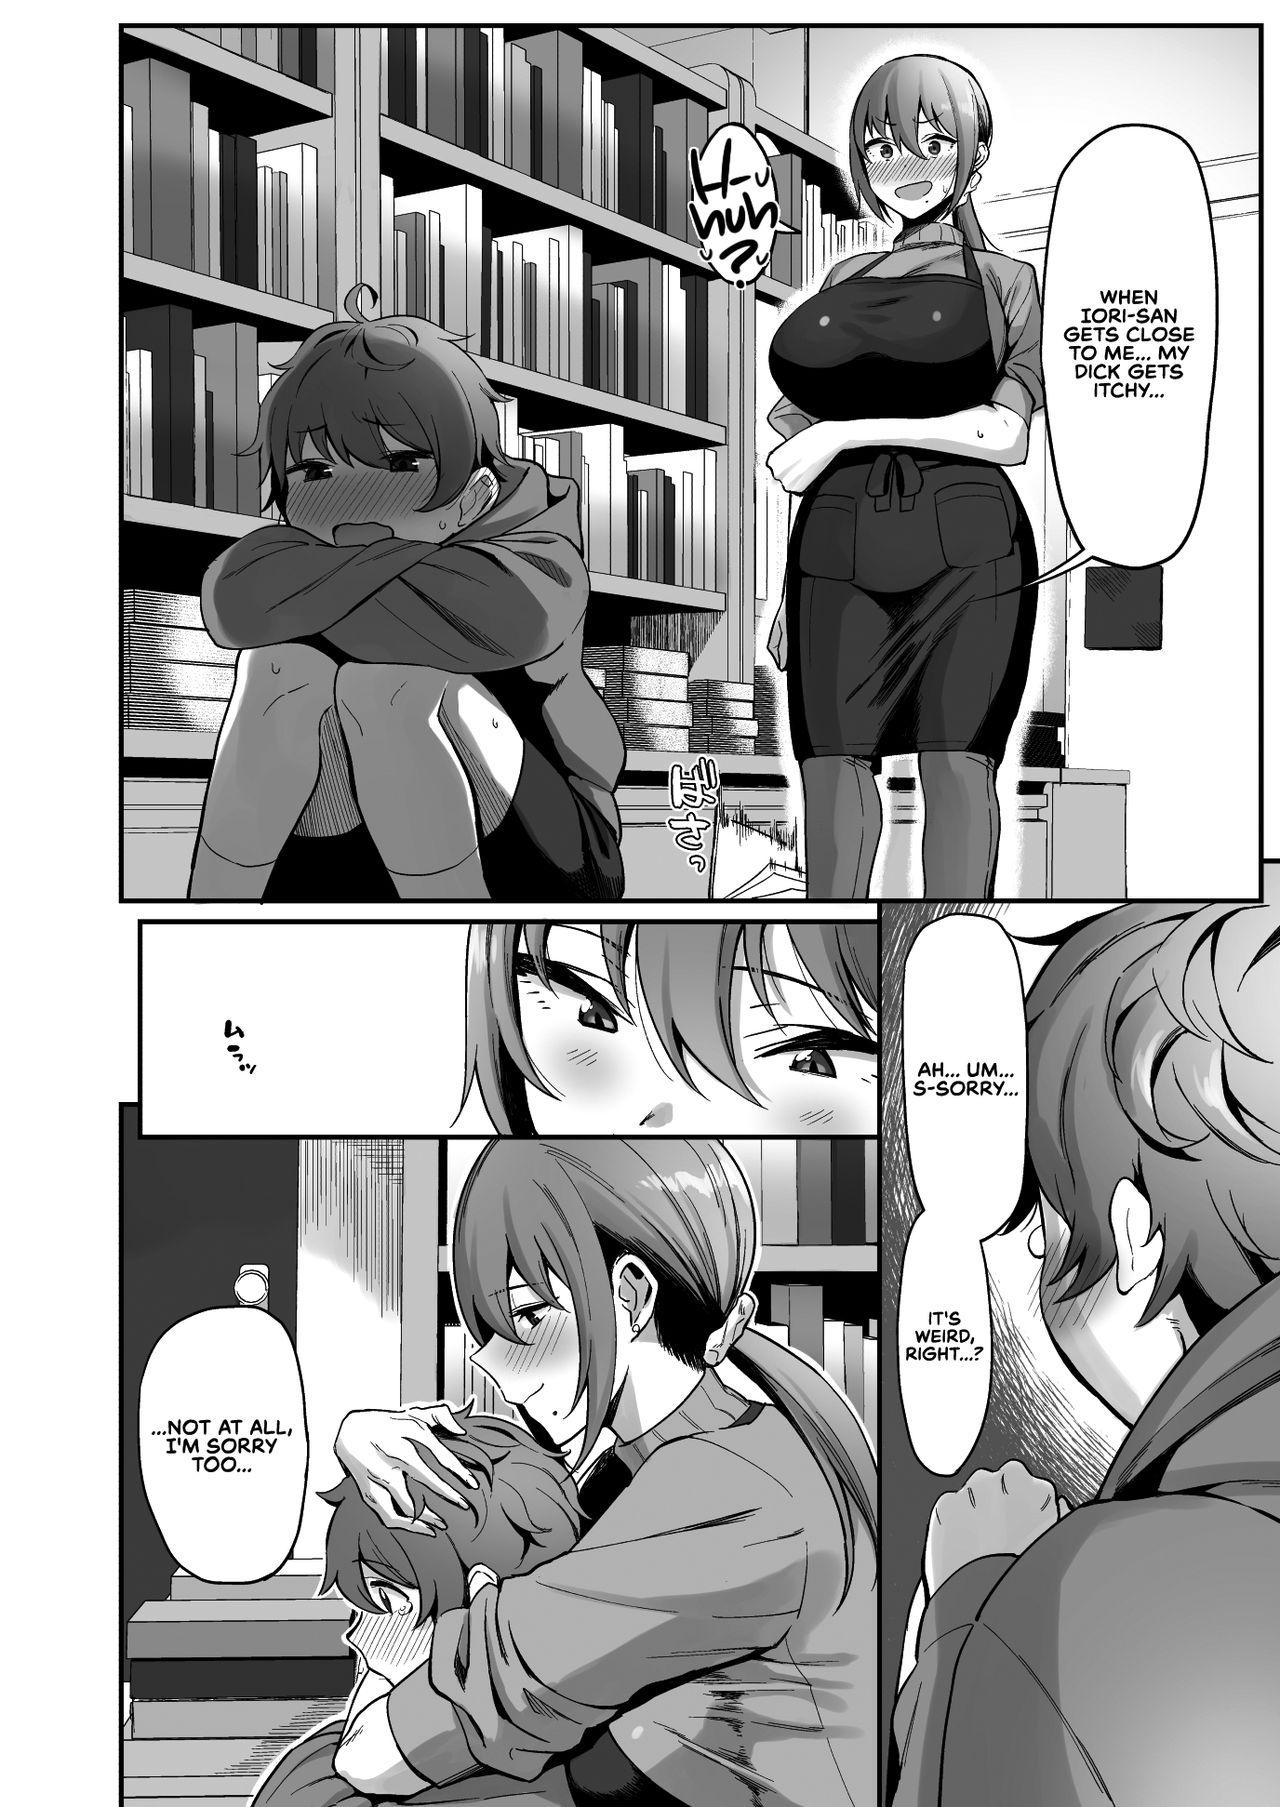 Furuhonya no Onee-san to | With The Lady From The Used Book Shop 8